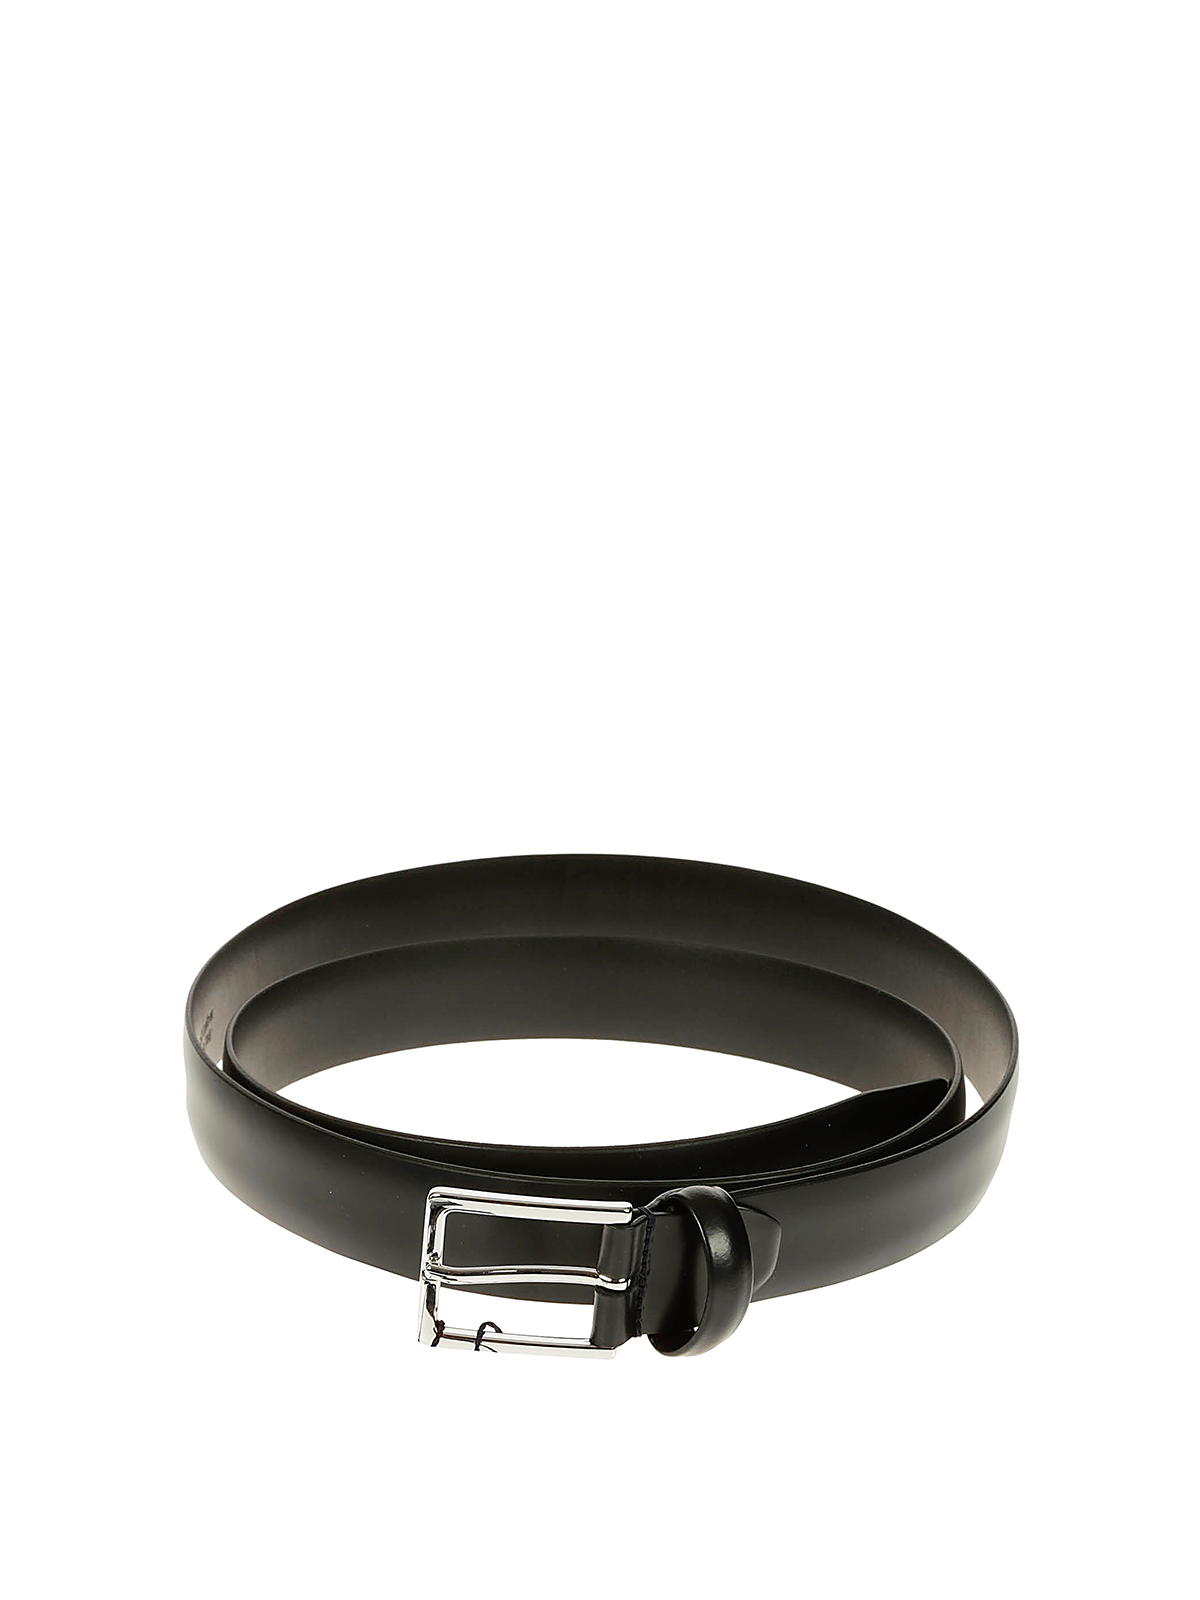 Anderson's Polished Leather Belt In Black